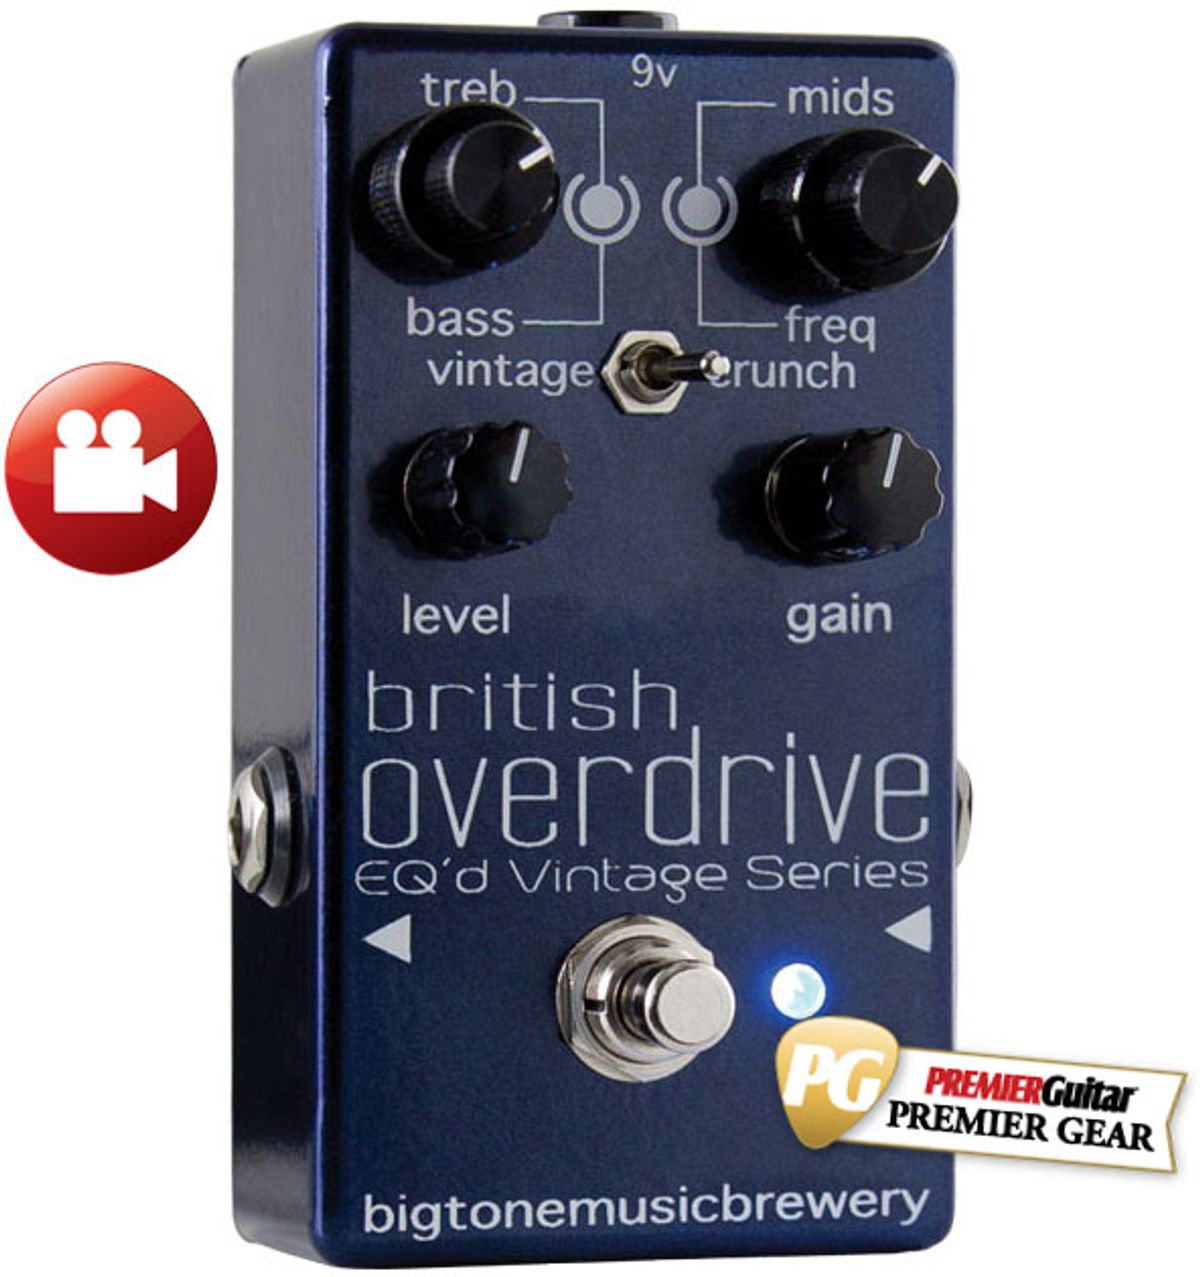 Big Tone Music Brewery British Overdrive Review